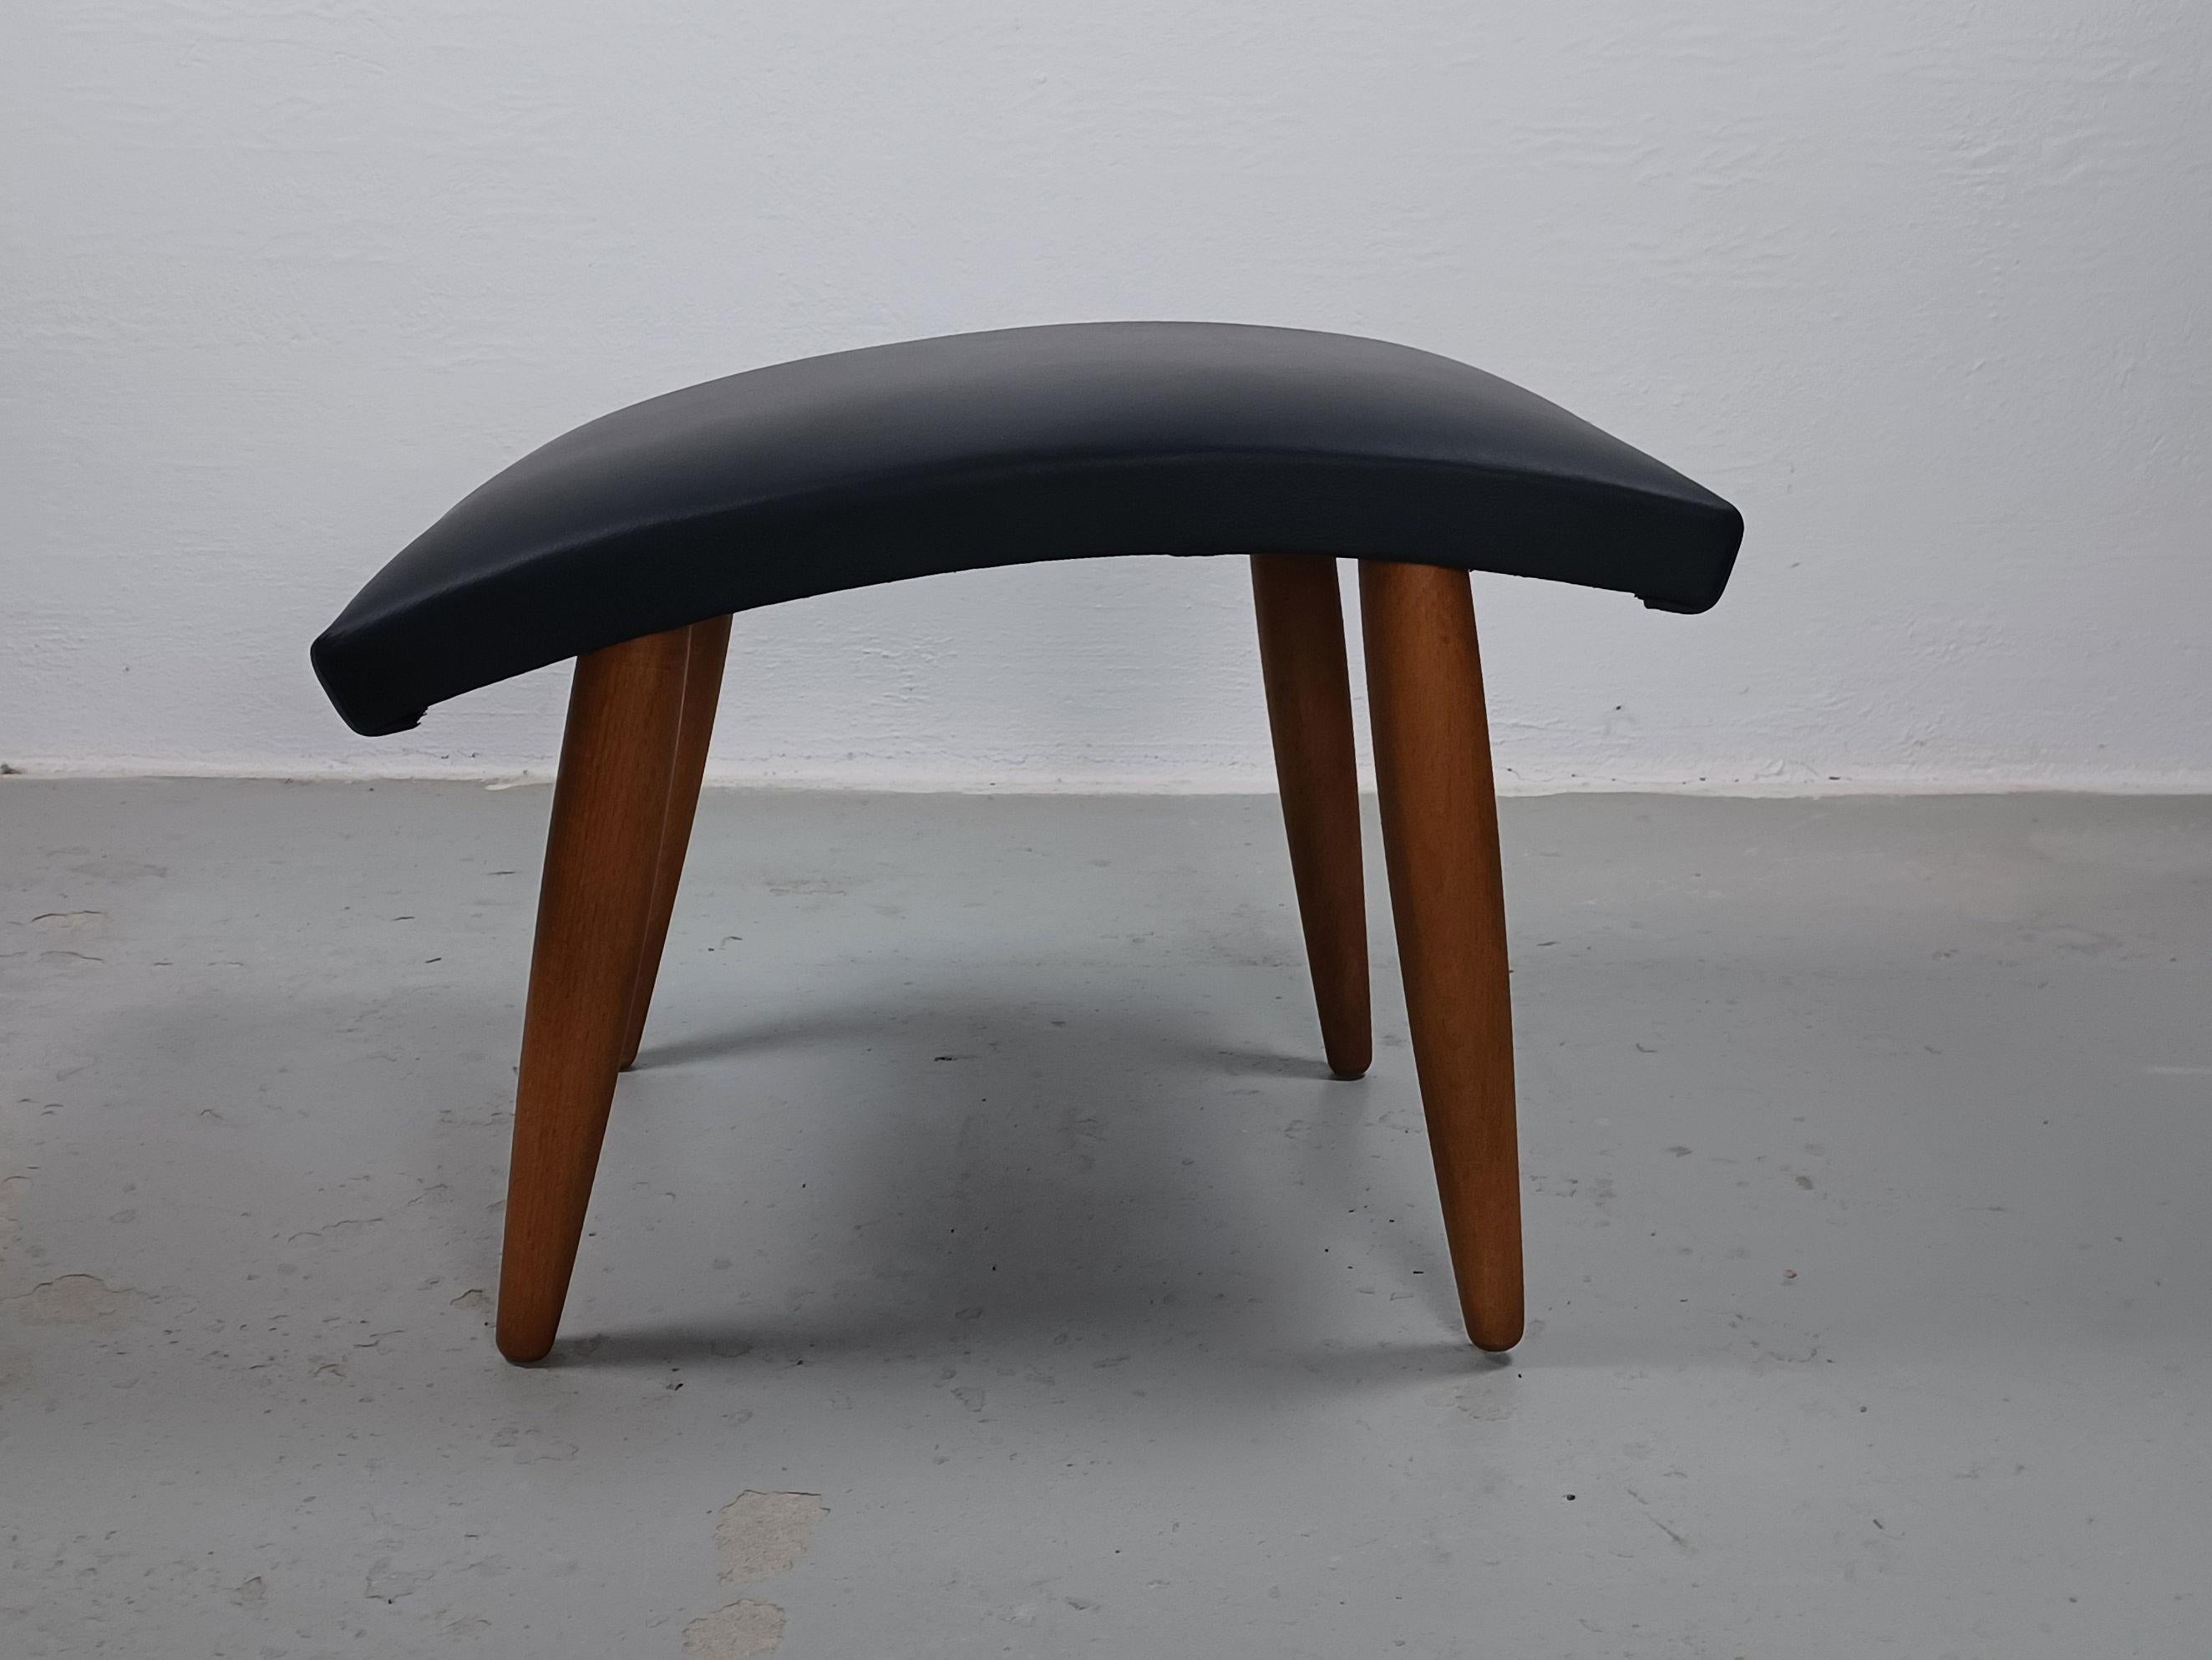 1960's Restored Danish footstool reupholstered in black leather.

Fully restored Danish footstool in slimlined minimalistic yet advanced Scandinavian modern design with it's combination of straight simple lines combined with it's organic curved